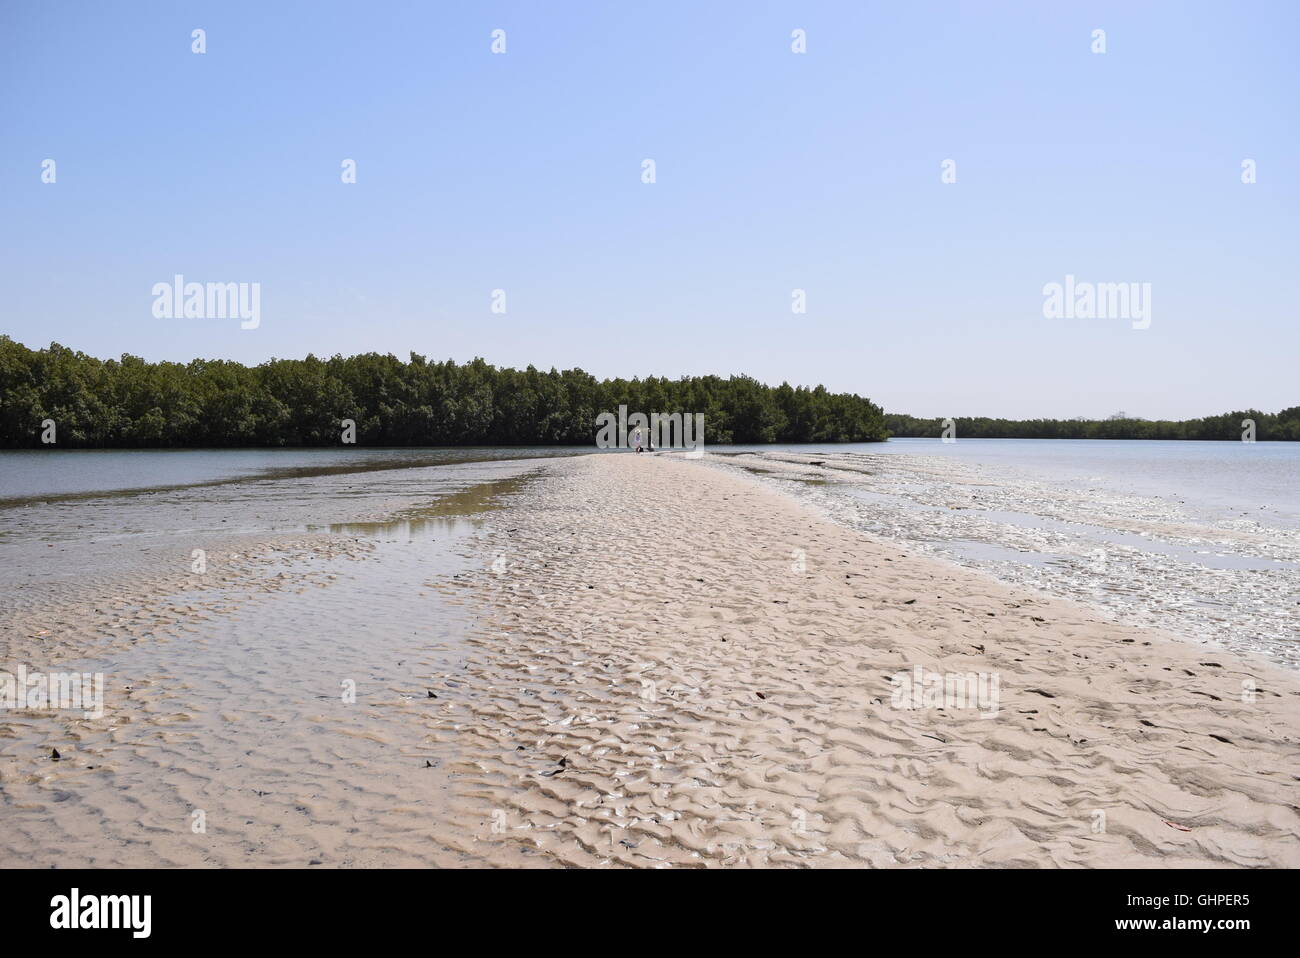 Sand Bank in The Gambia River Stock Photo